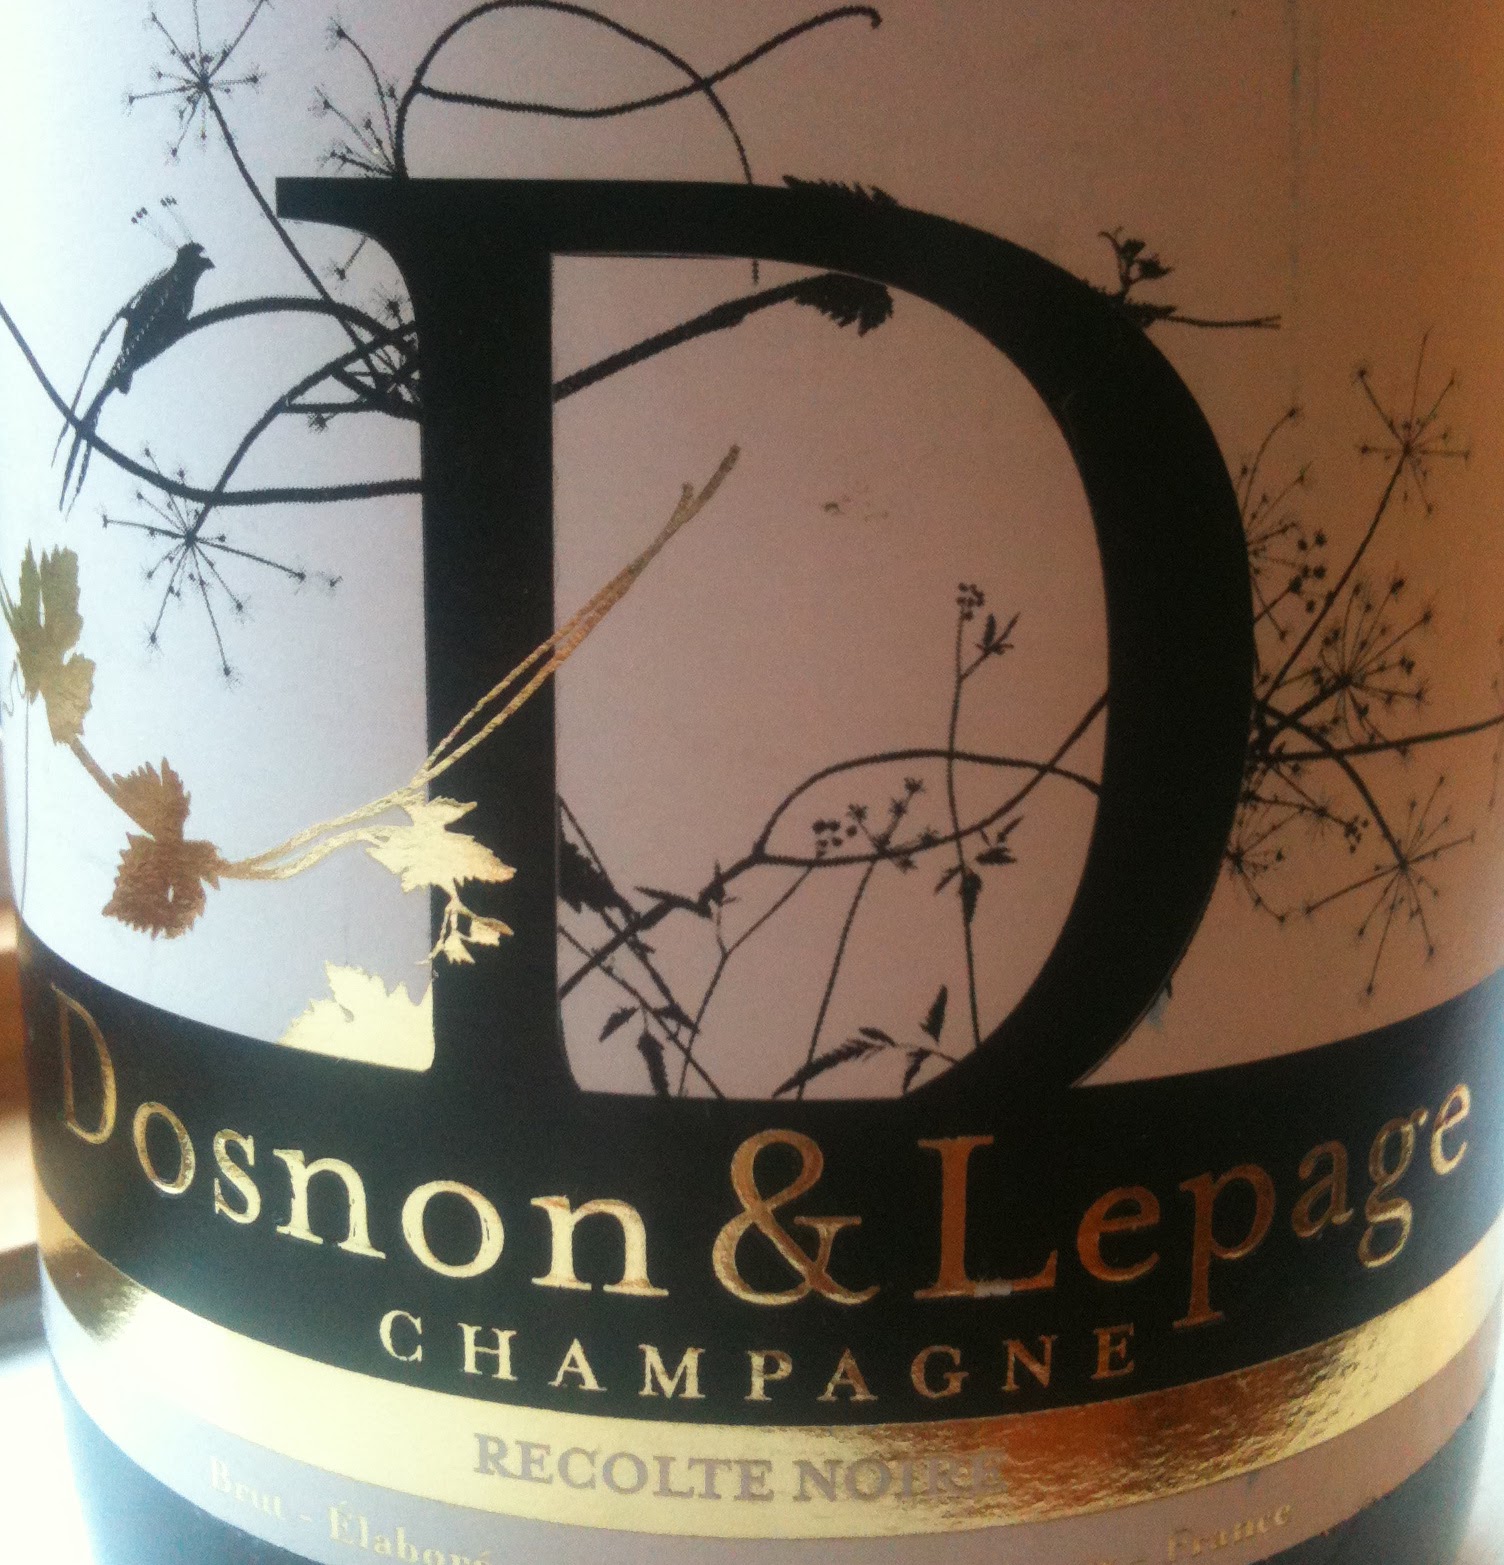 NV Dosnon and Lepage Recolte Blanch Brut - click image for full description